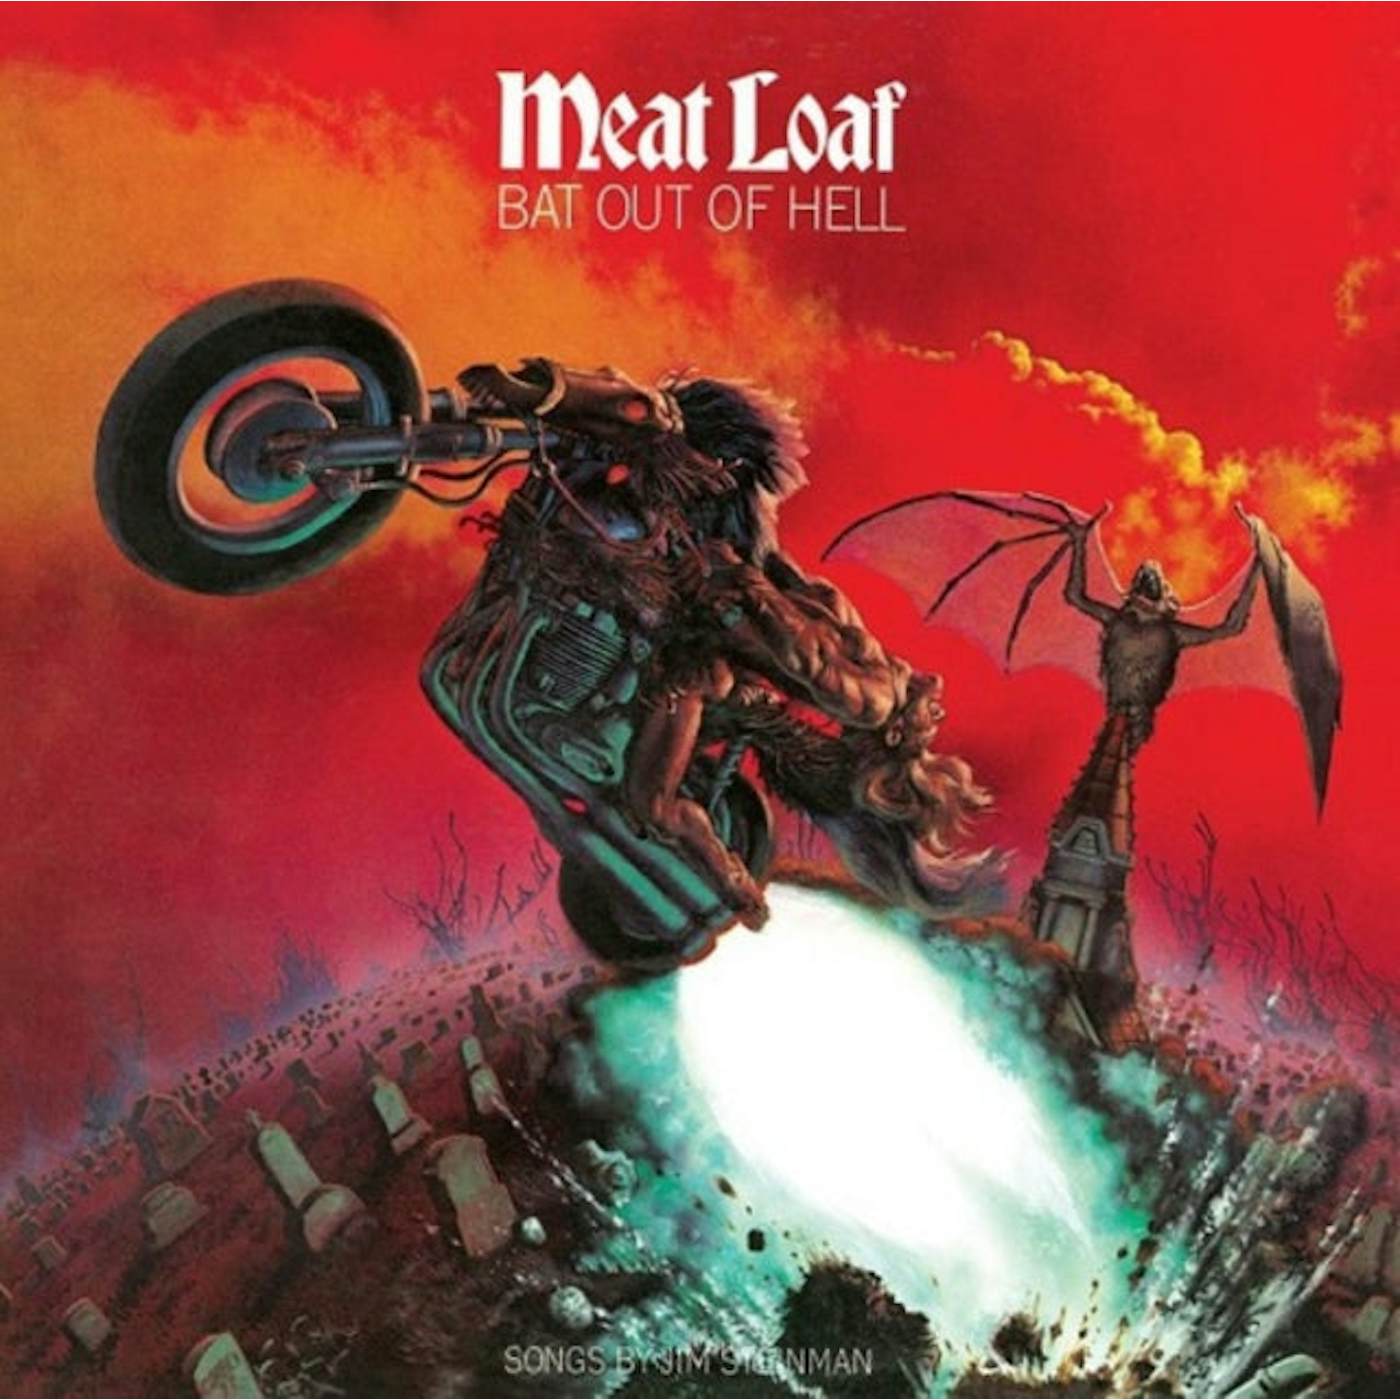 Meat Loaf LP Vinyl Record - Bat Out Of Hell